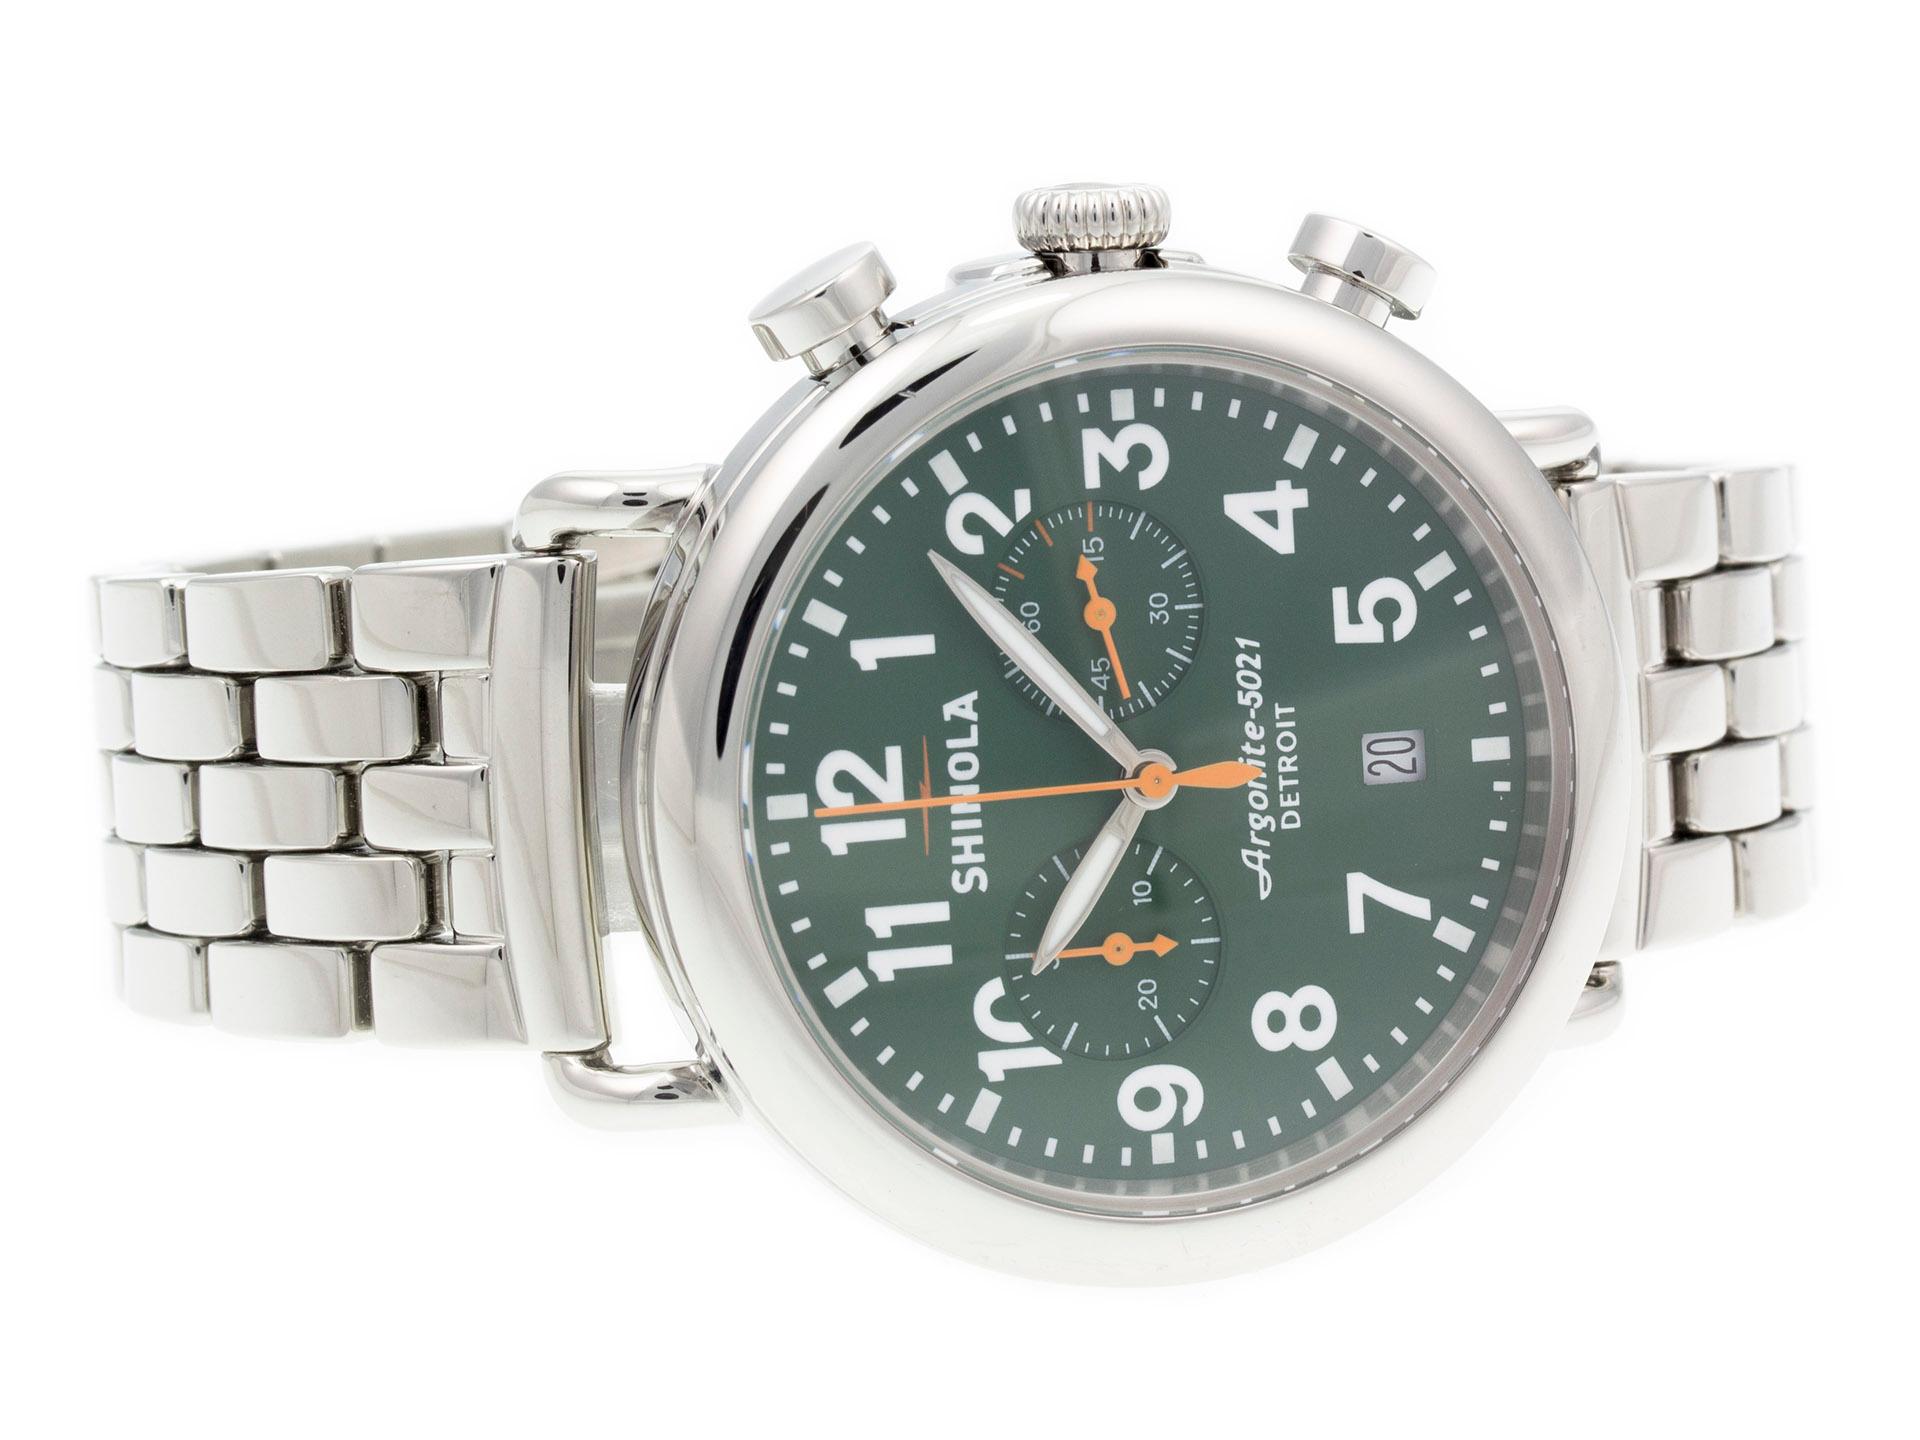 Stainless steel Shinola The Runwell Chrono 10000063 watch, water resistant to 100m, with date, chronograph, and bracelet.

Watch	
Brand:	Shinola
Series:	The Runwell
Model #:	10000063
Gender:	Men’s
Condition:	Great Display Model, Light Scratches on